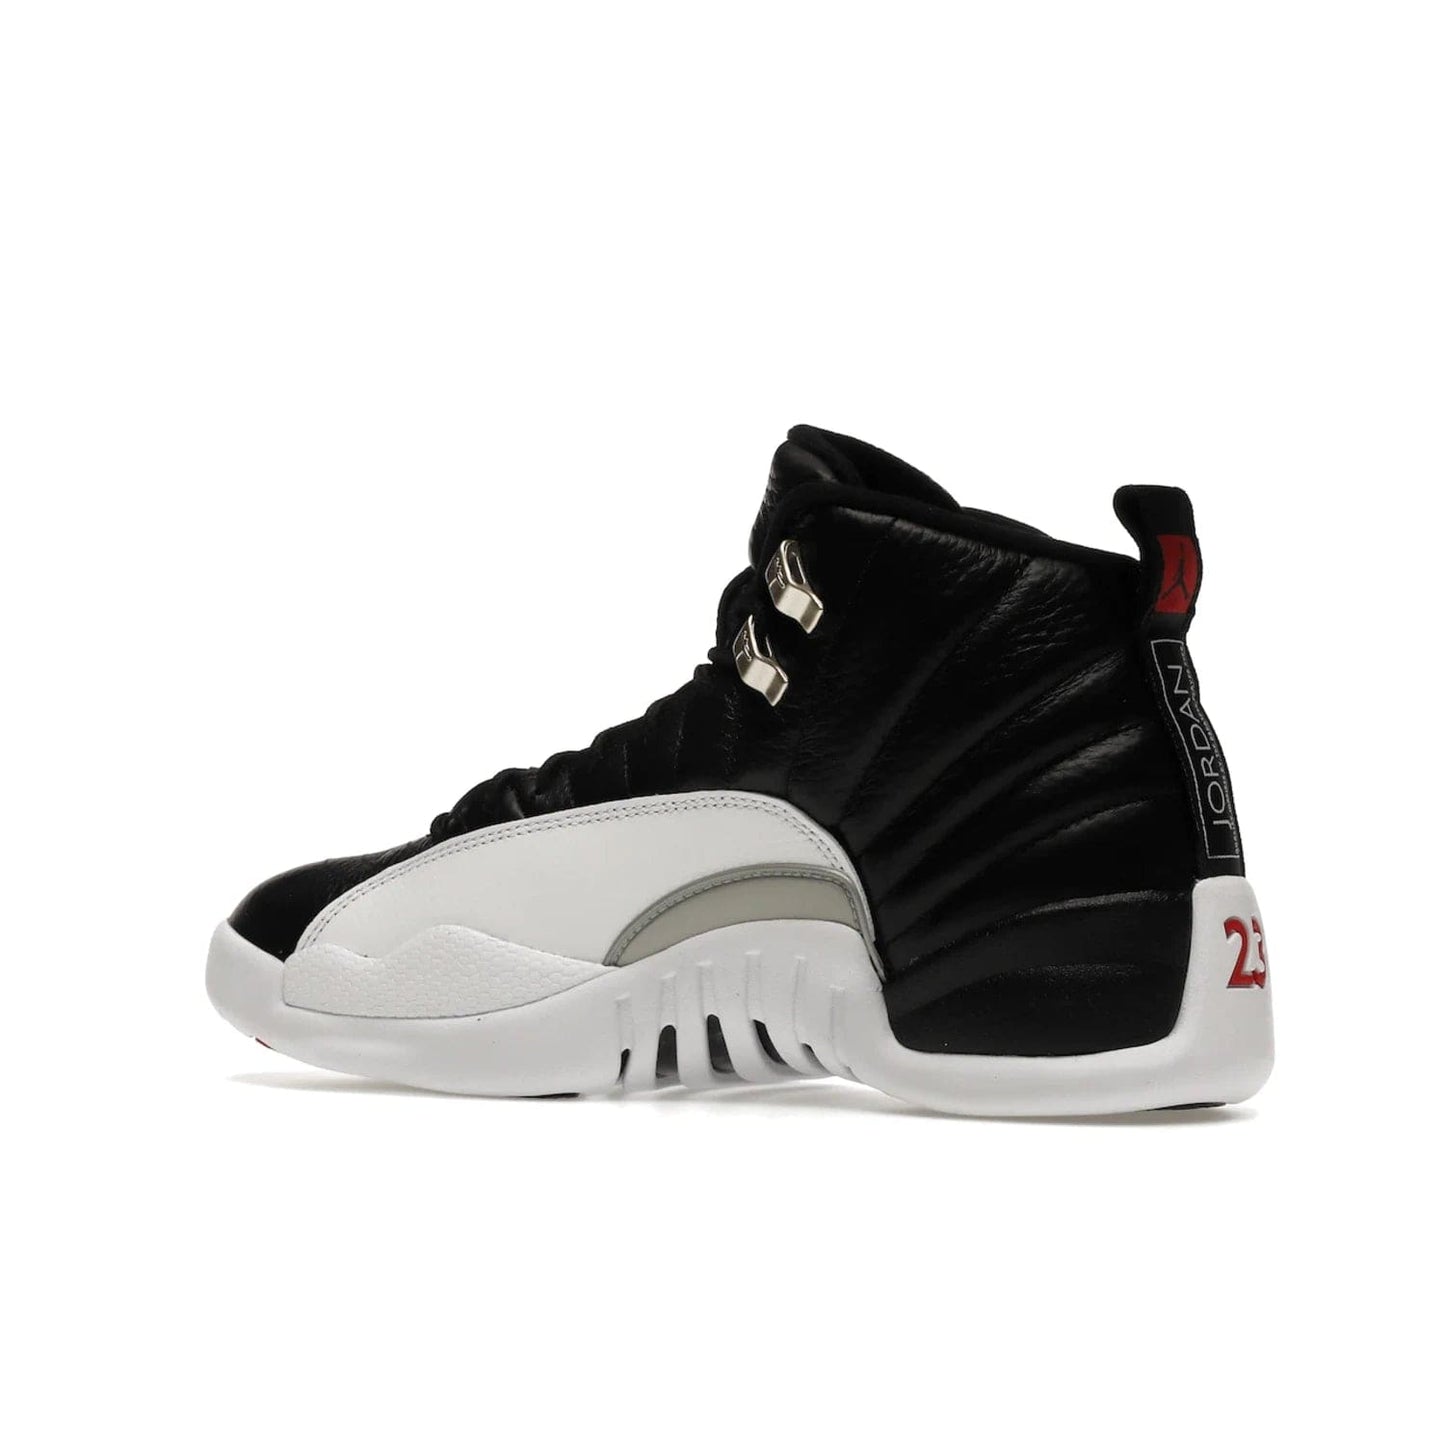 Jordan 12 Retro Playoffs (2022) - Image 22 - Only at www.BallersClubKickz.com - Retro Air Jordan 12 Playoffs. Celebrate 25 years with MJ's iconic shoe. Black tumbled leather upper, white sole with carbon fiber detailing and Jumpman embroidery. Must-have for any Jordan shoe fan. Releases March 2022.